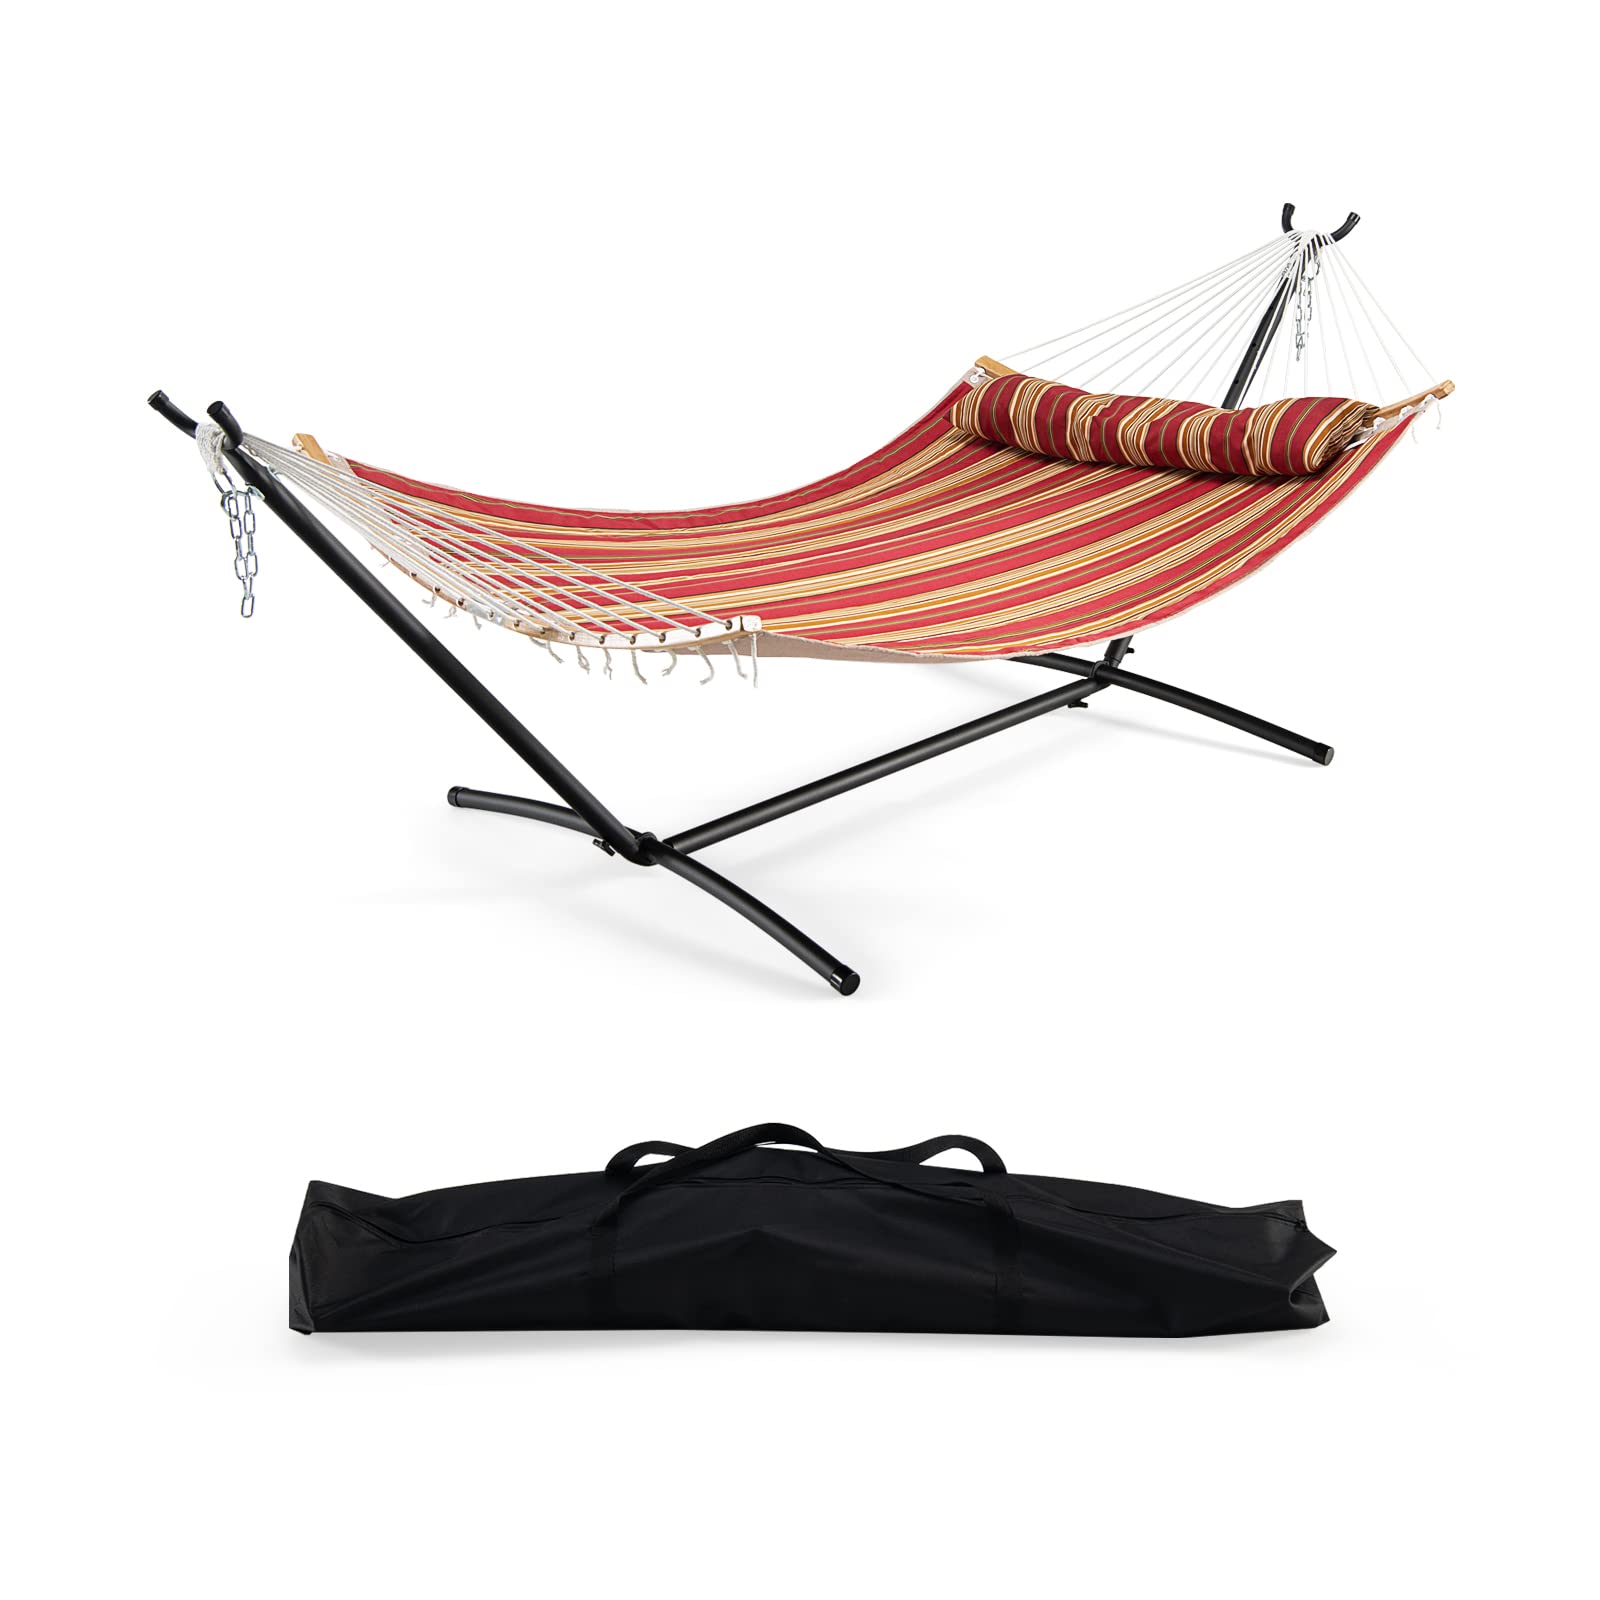 Giantex Hammock with Stand, Outdoor Hammock Swing with Stand Set (Blue&Red)